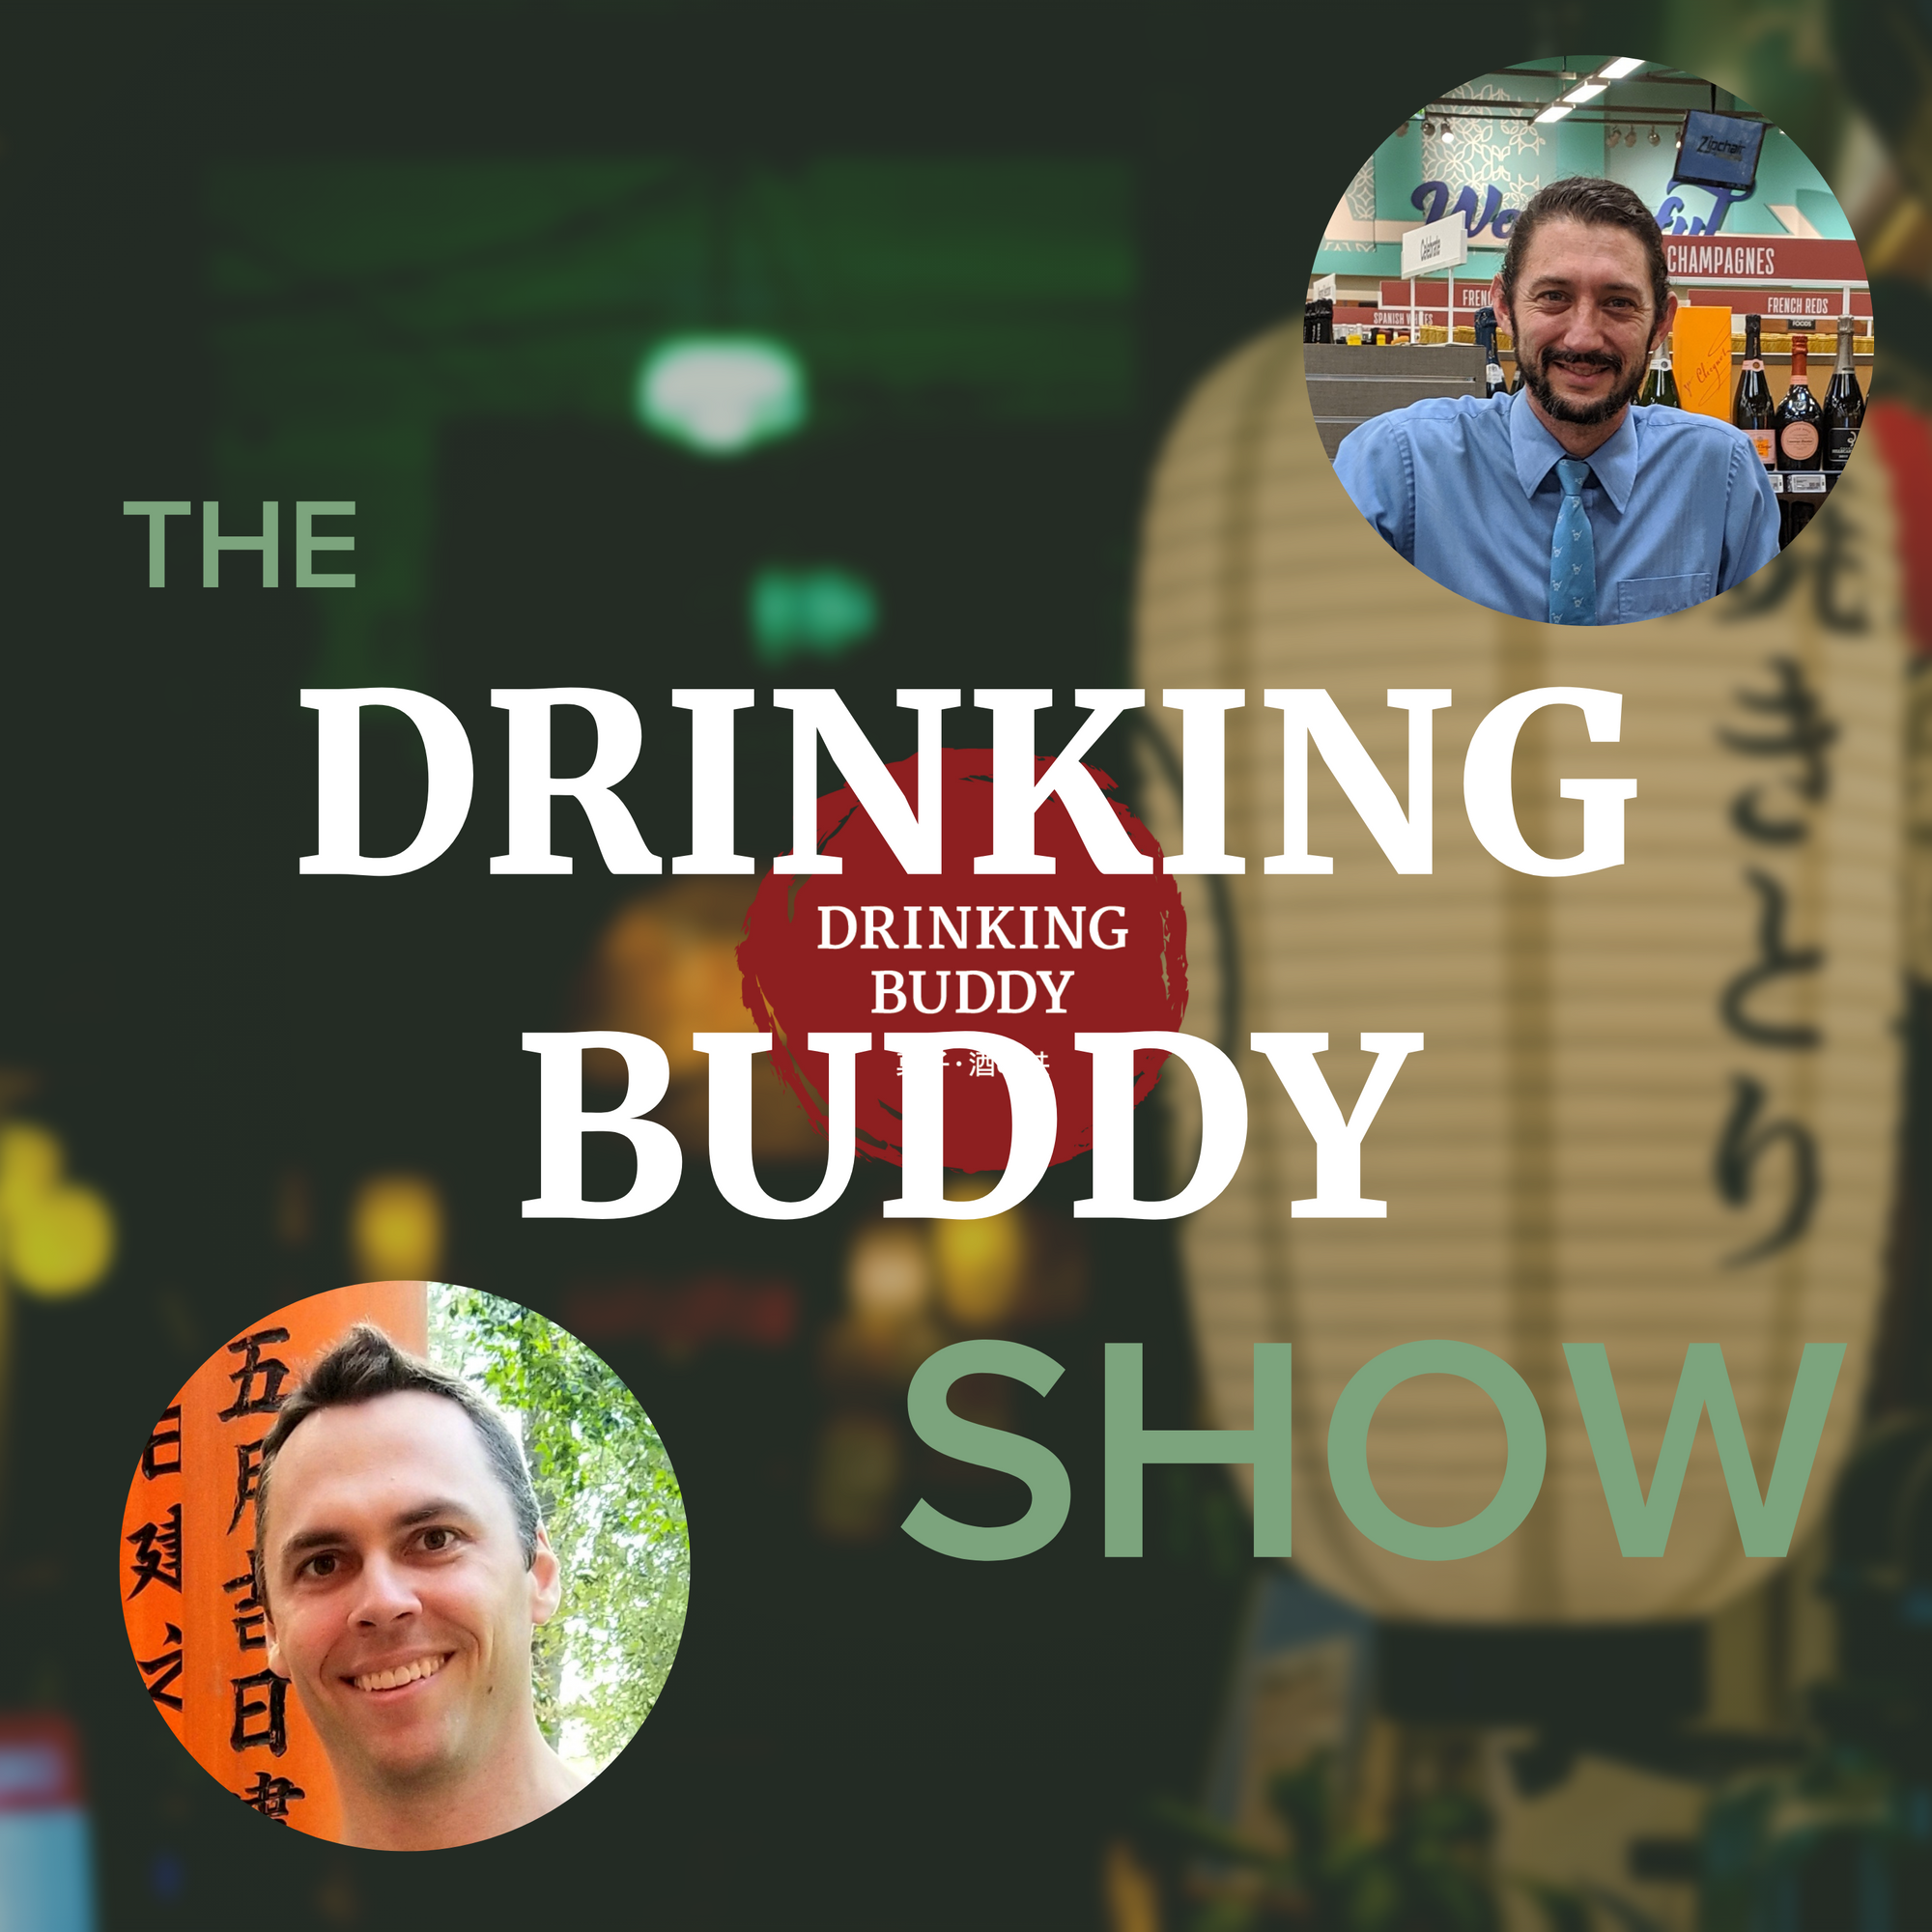 The Drinking Buddy Show Episode 3: The Basics of Sake with Greg Beck